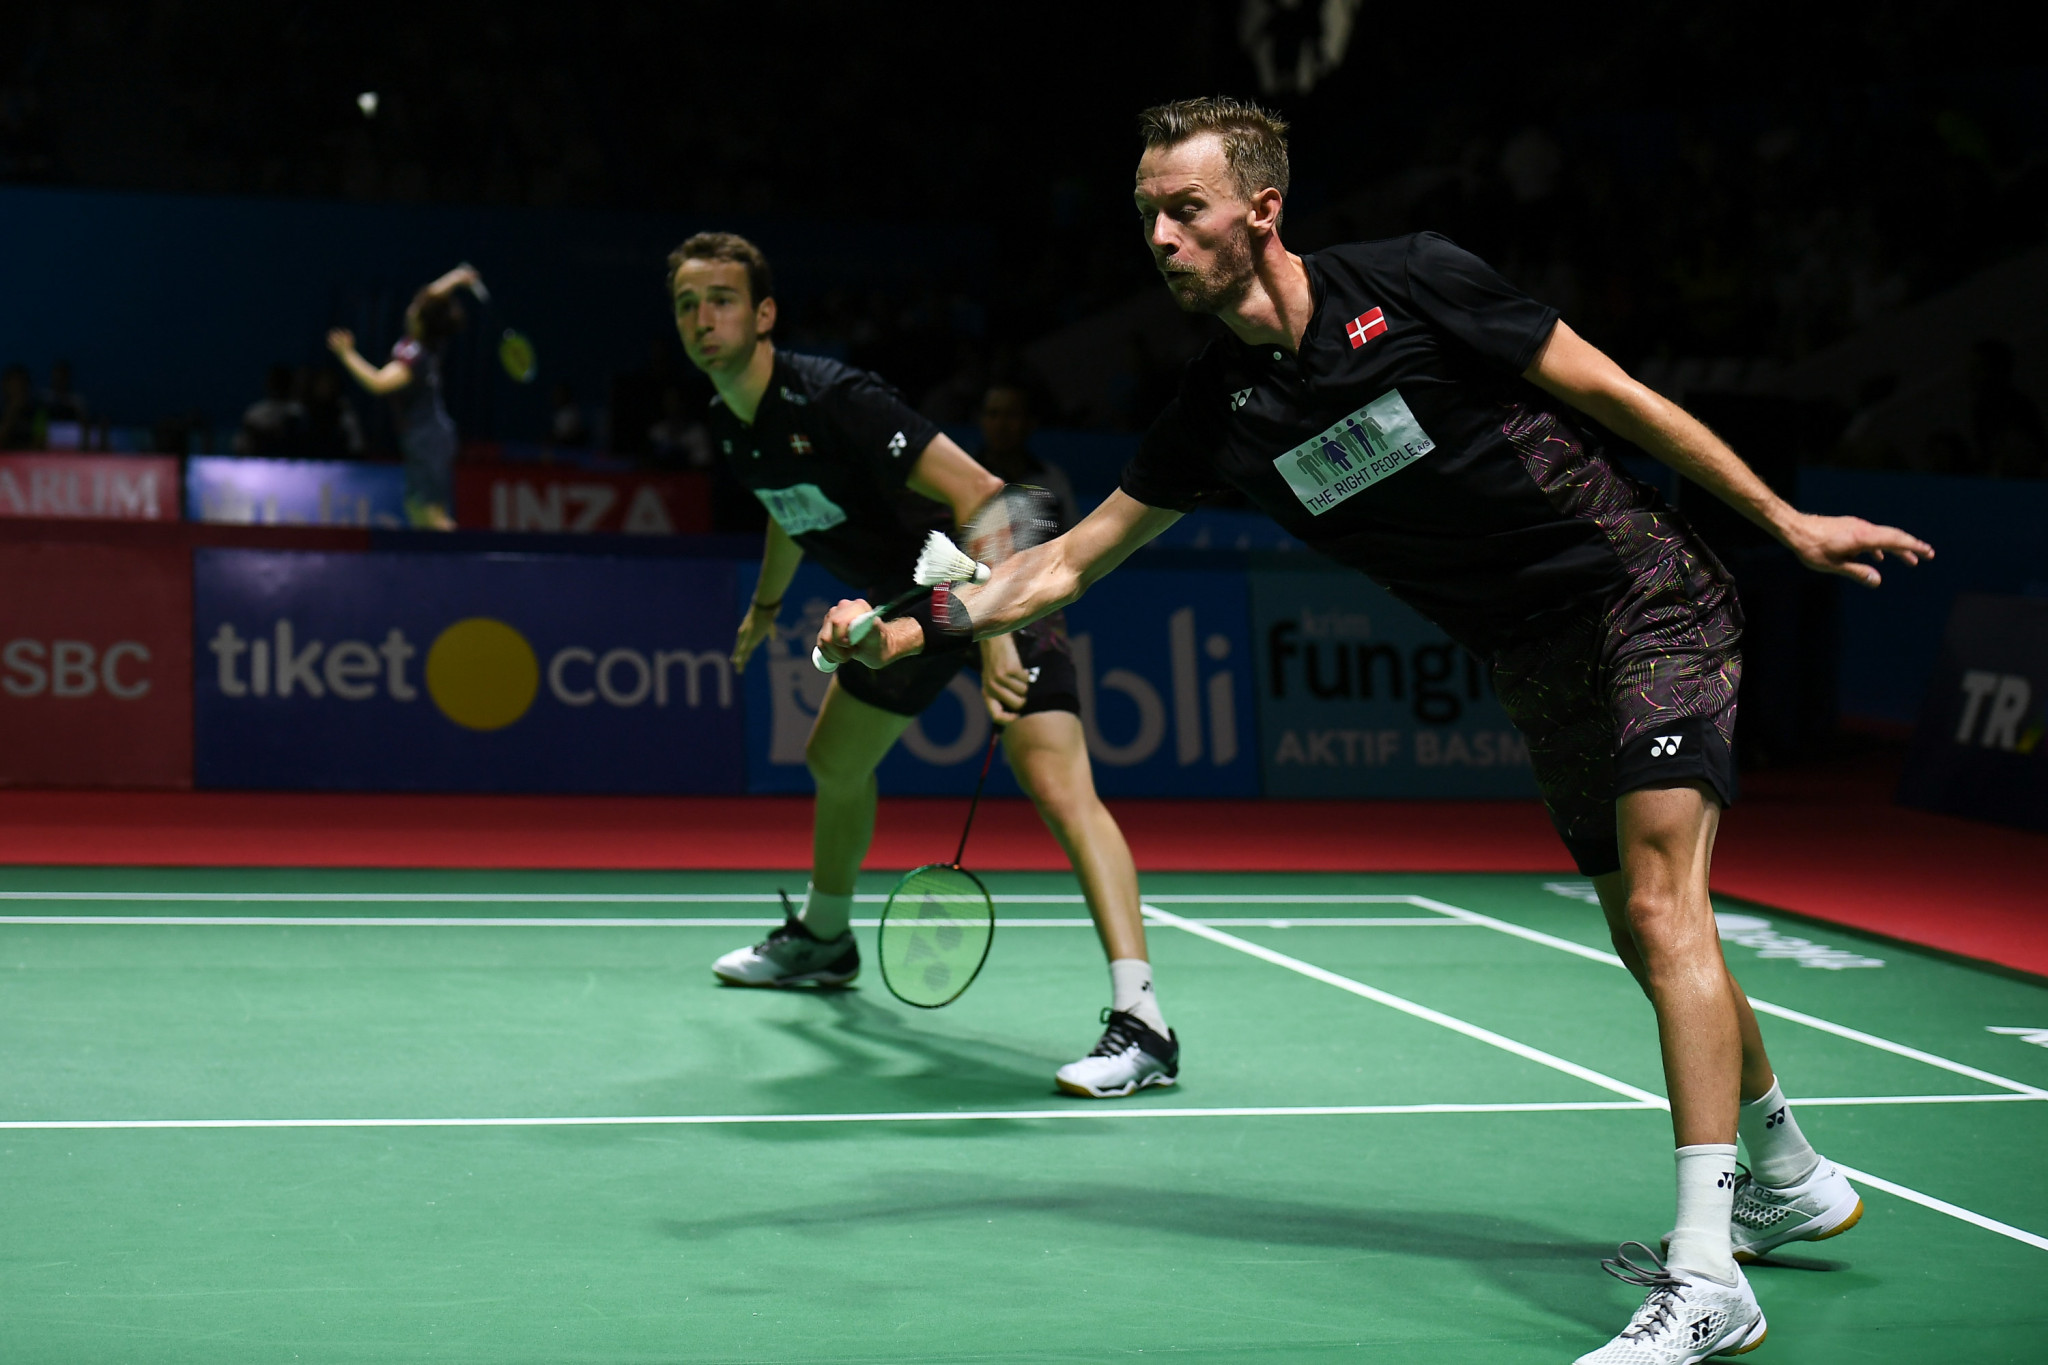 The second seeds in the men's doubles, Mathias Boe and Carsten Mogensen, were another high profile pair to lose today ©Getty Images